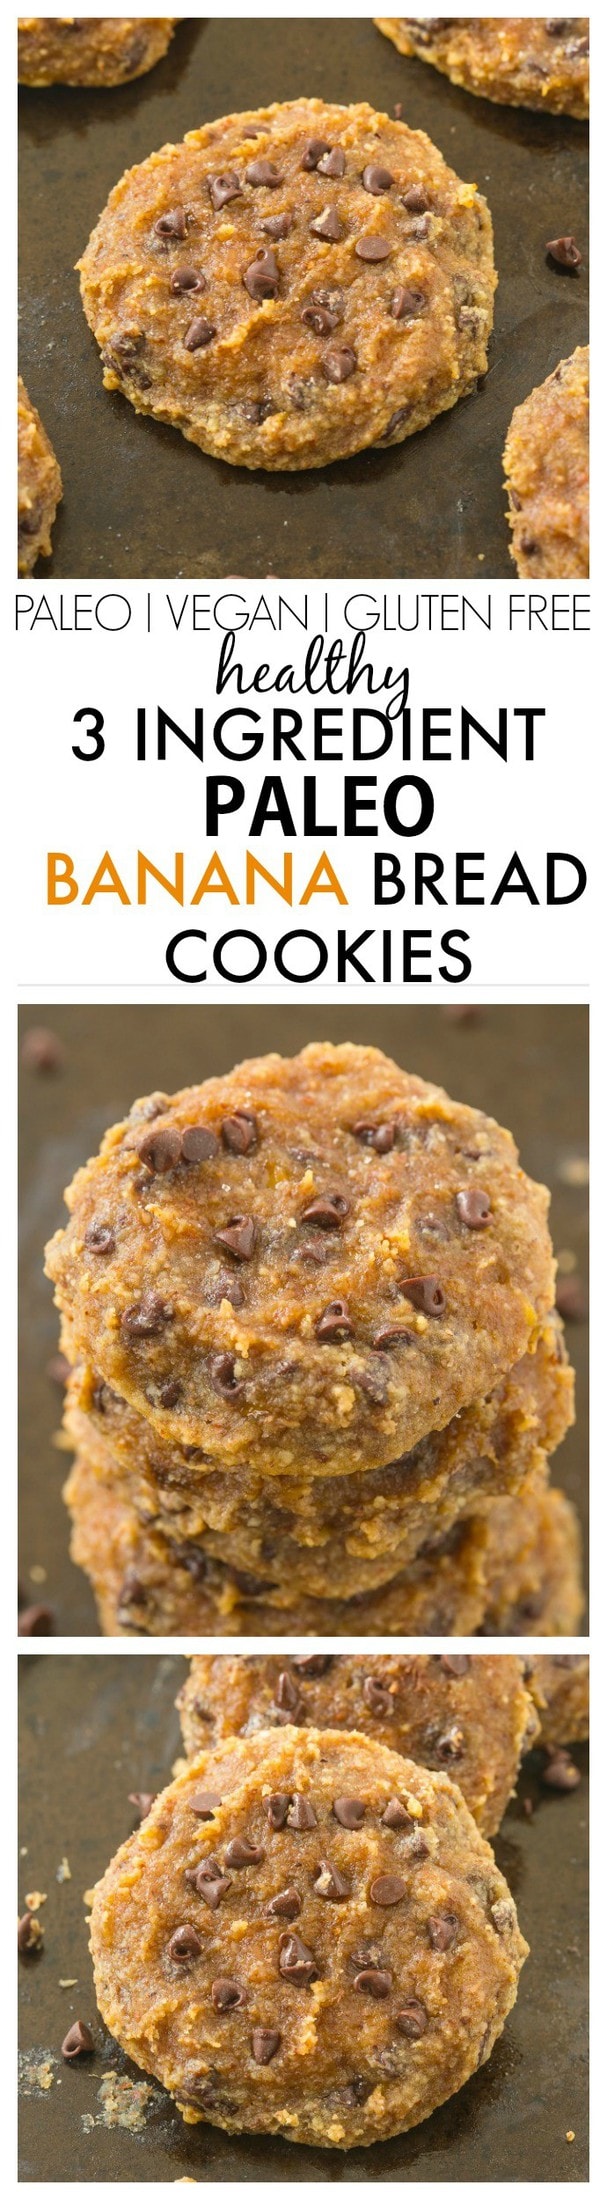 Healthy 3 Ingredient Paleo Banana Bread Cookies- Soft and EXTRA chewy cookies which taste like a nutty banana bread- NO butter, oil, flour or sugar! {vegan, gluten free, paleo recipe}- thebigmansworld.com